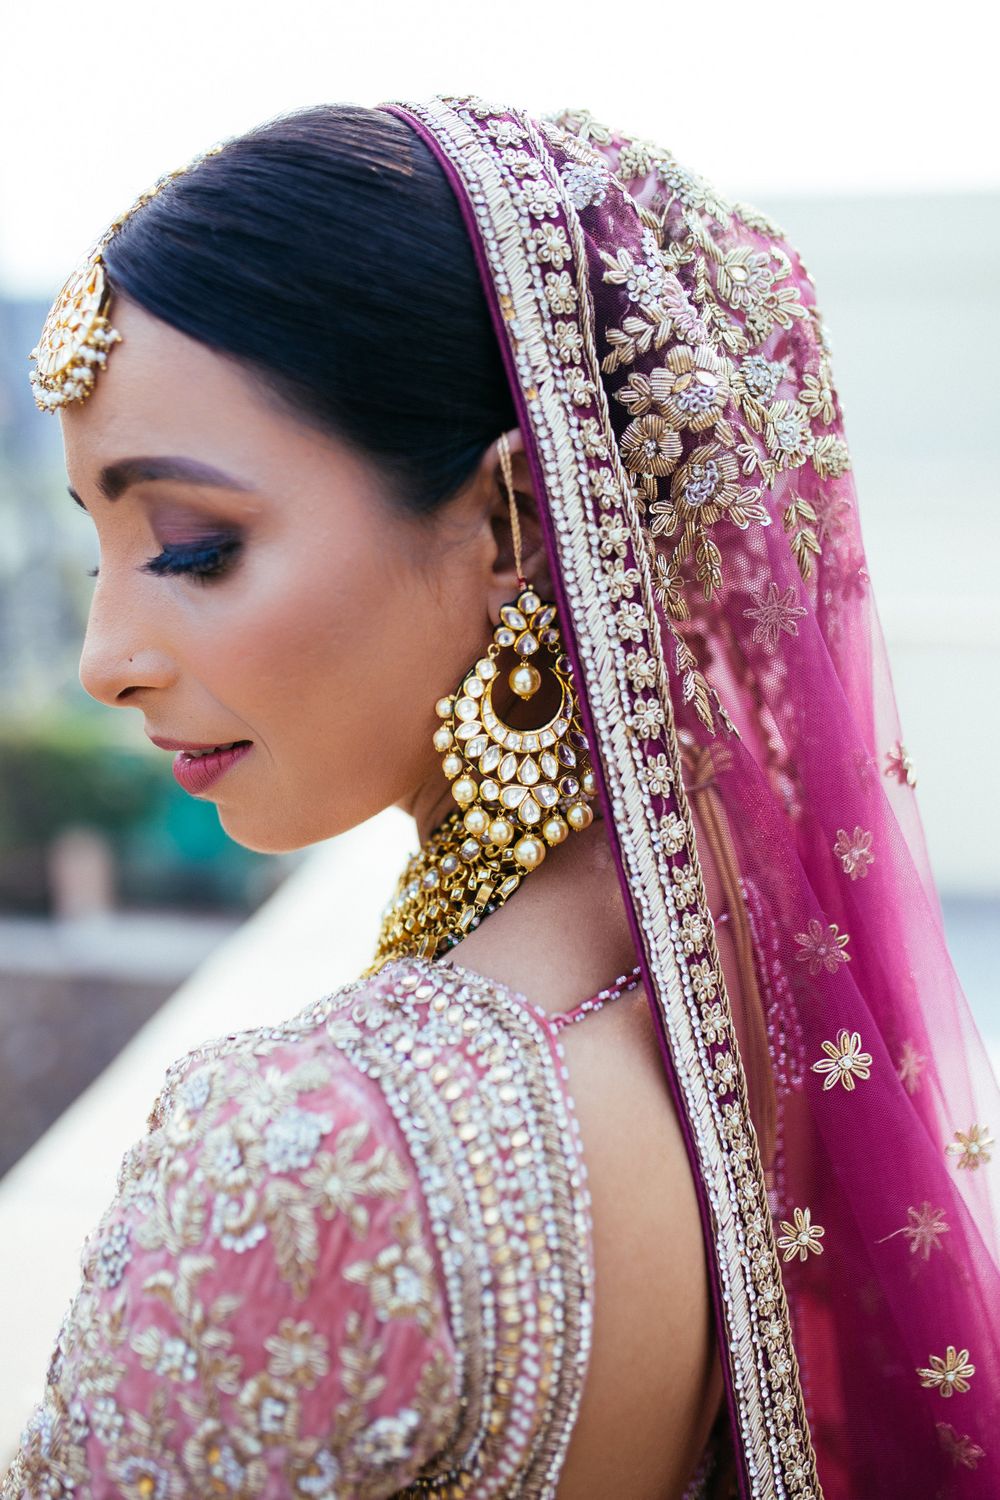 Photo of Stunning side profile of a bride wearing gold earrings